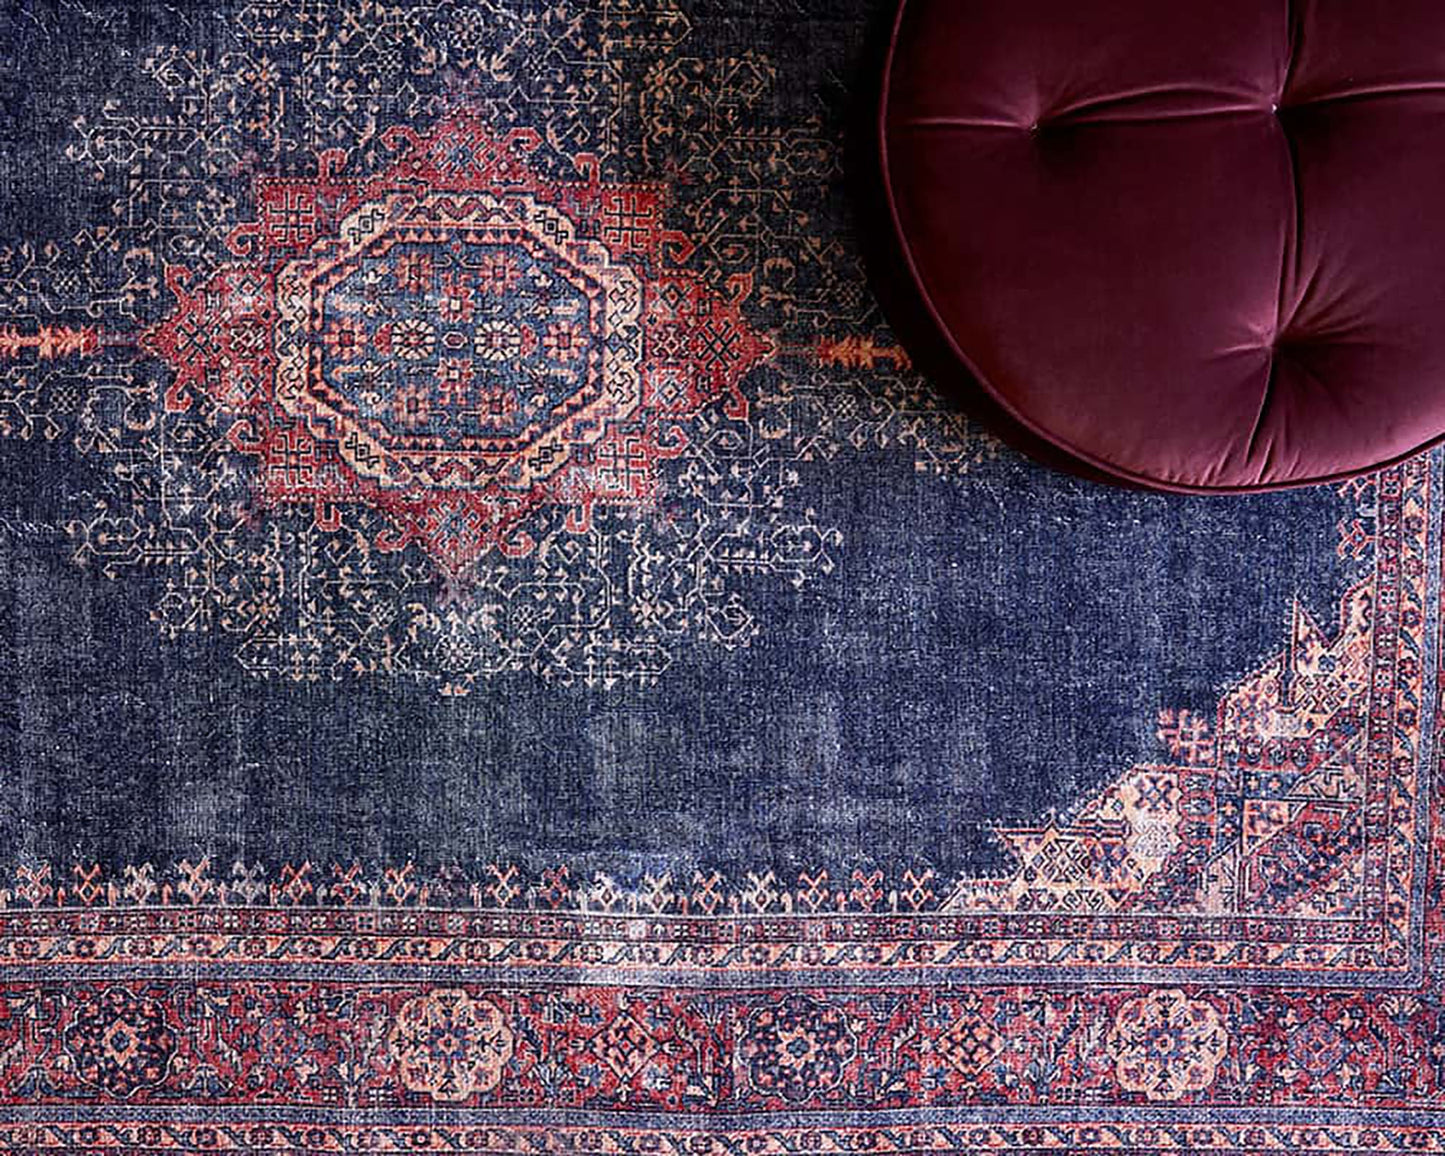 NARGAN | Persian Pattern Oriental Rug, Antique looks, Hand-knotted texture, Home decor, Traditional, Central Medallion, Navy blue, Red, Rugs